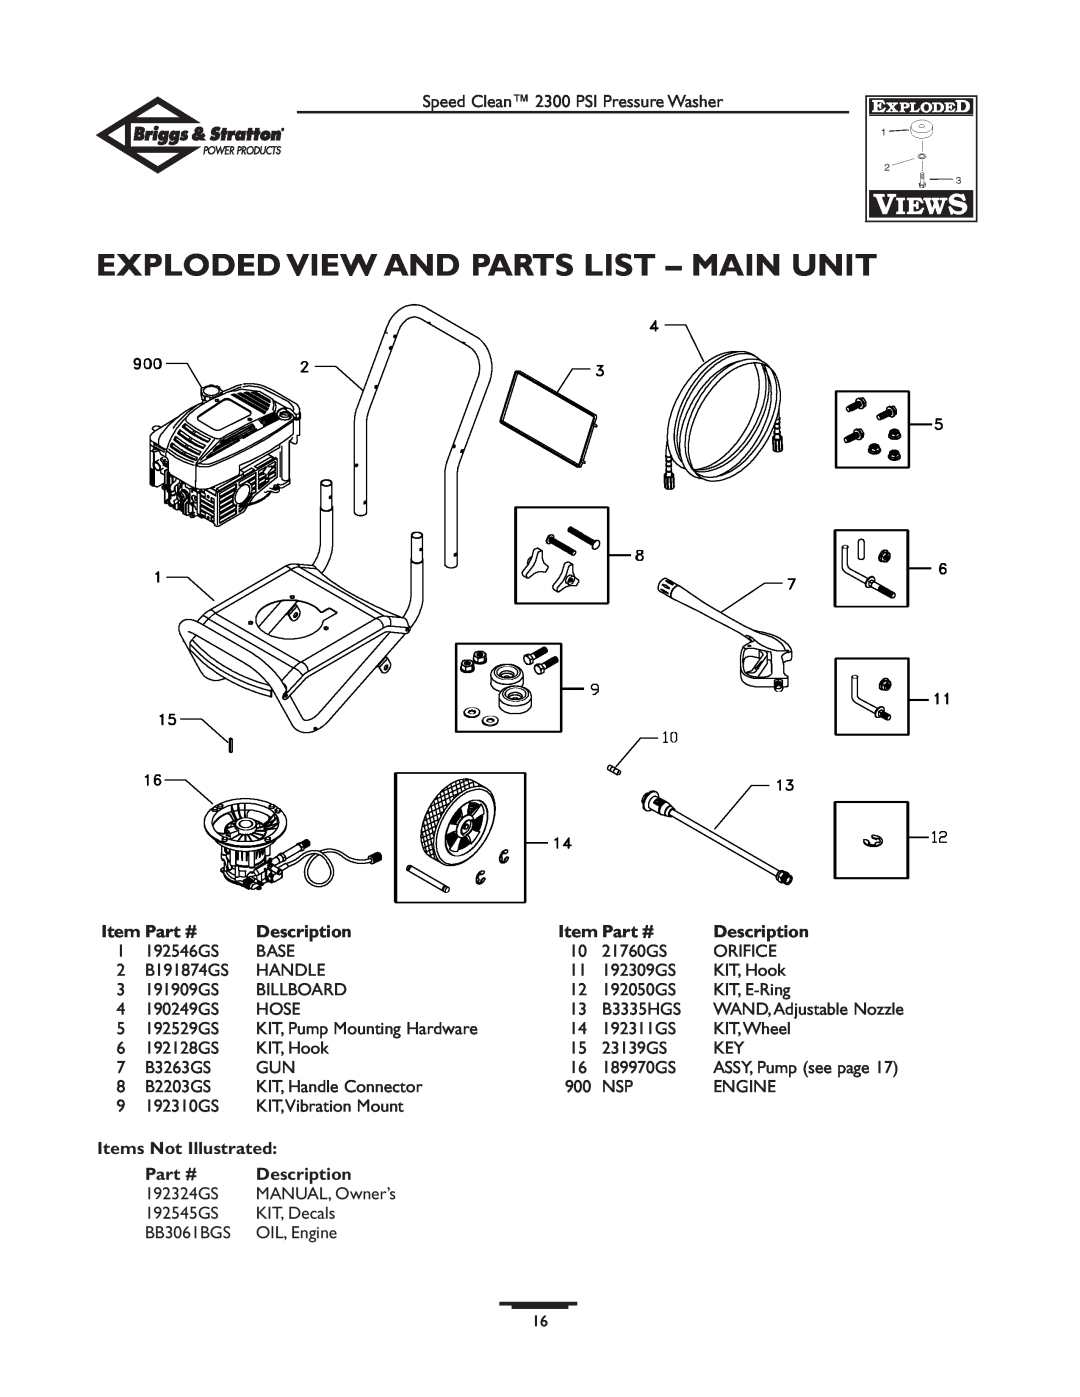 Briggs & Stratton 1909-0 Exploded View And Parts List – Main Unit, Item Part #, Description, Items Not Illustrated 